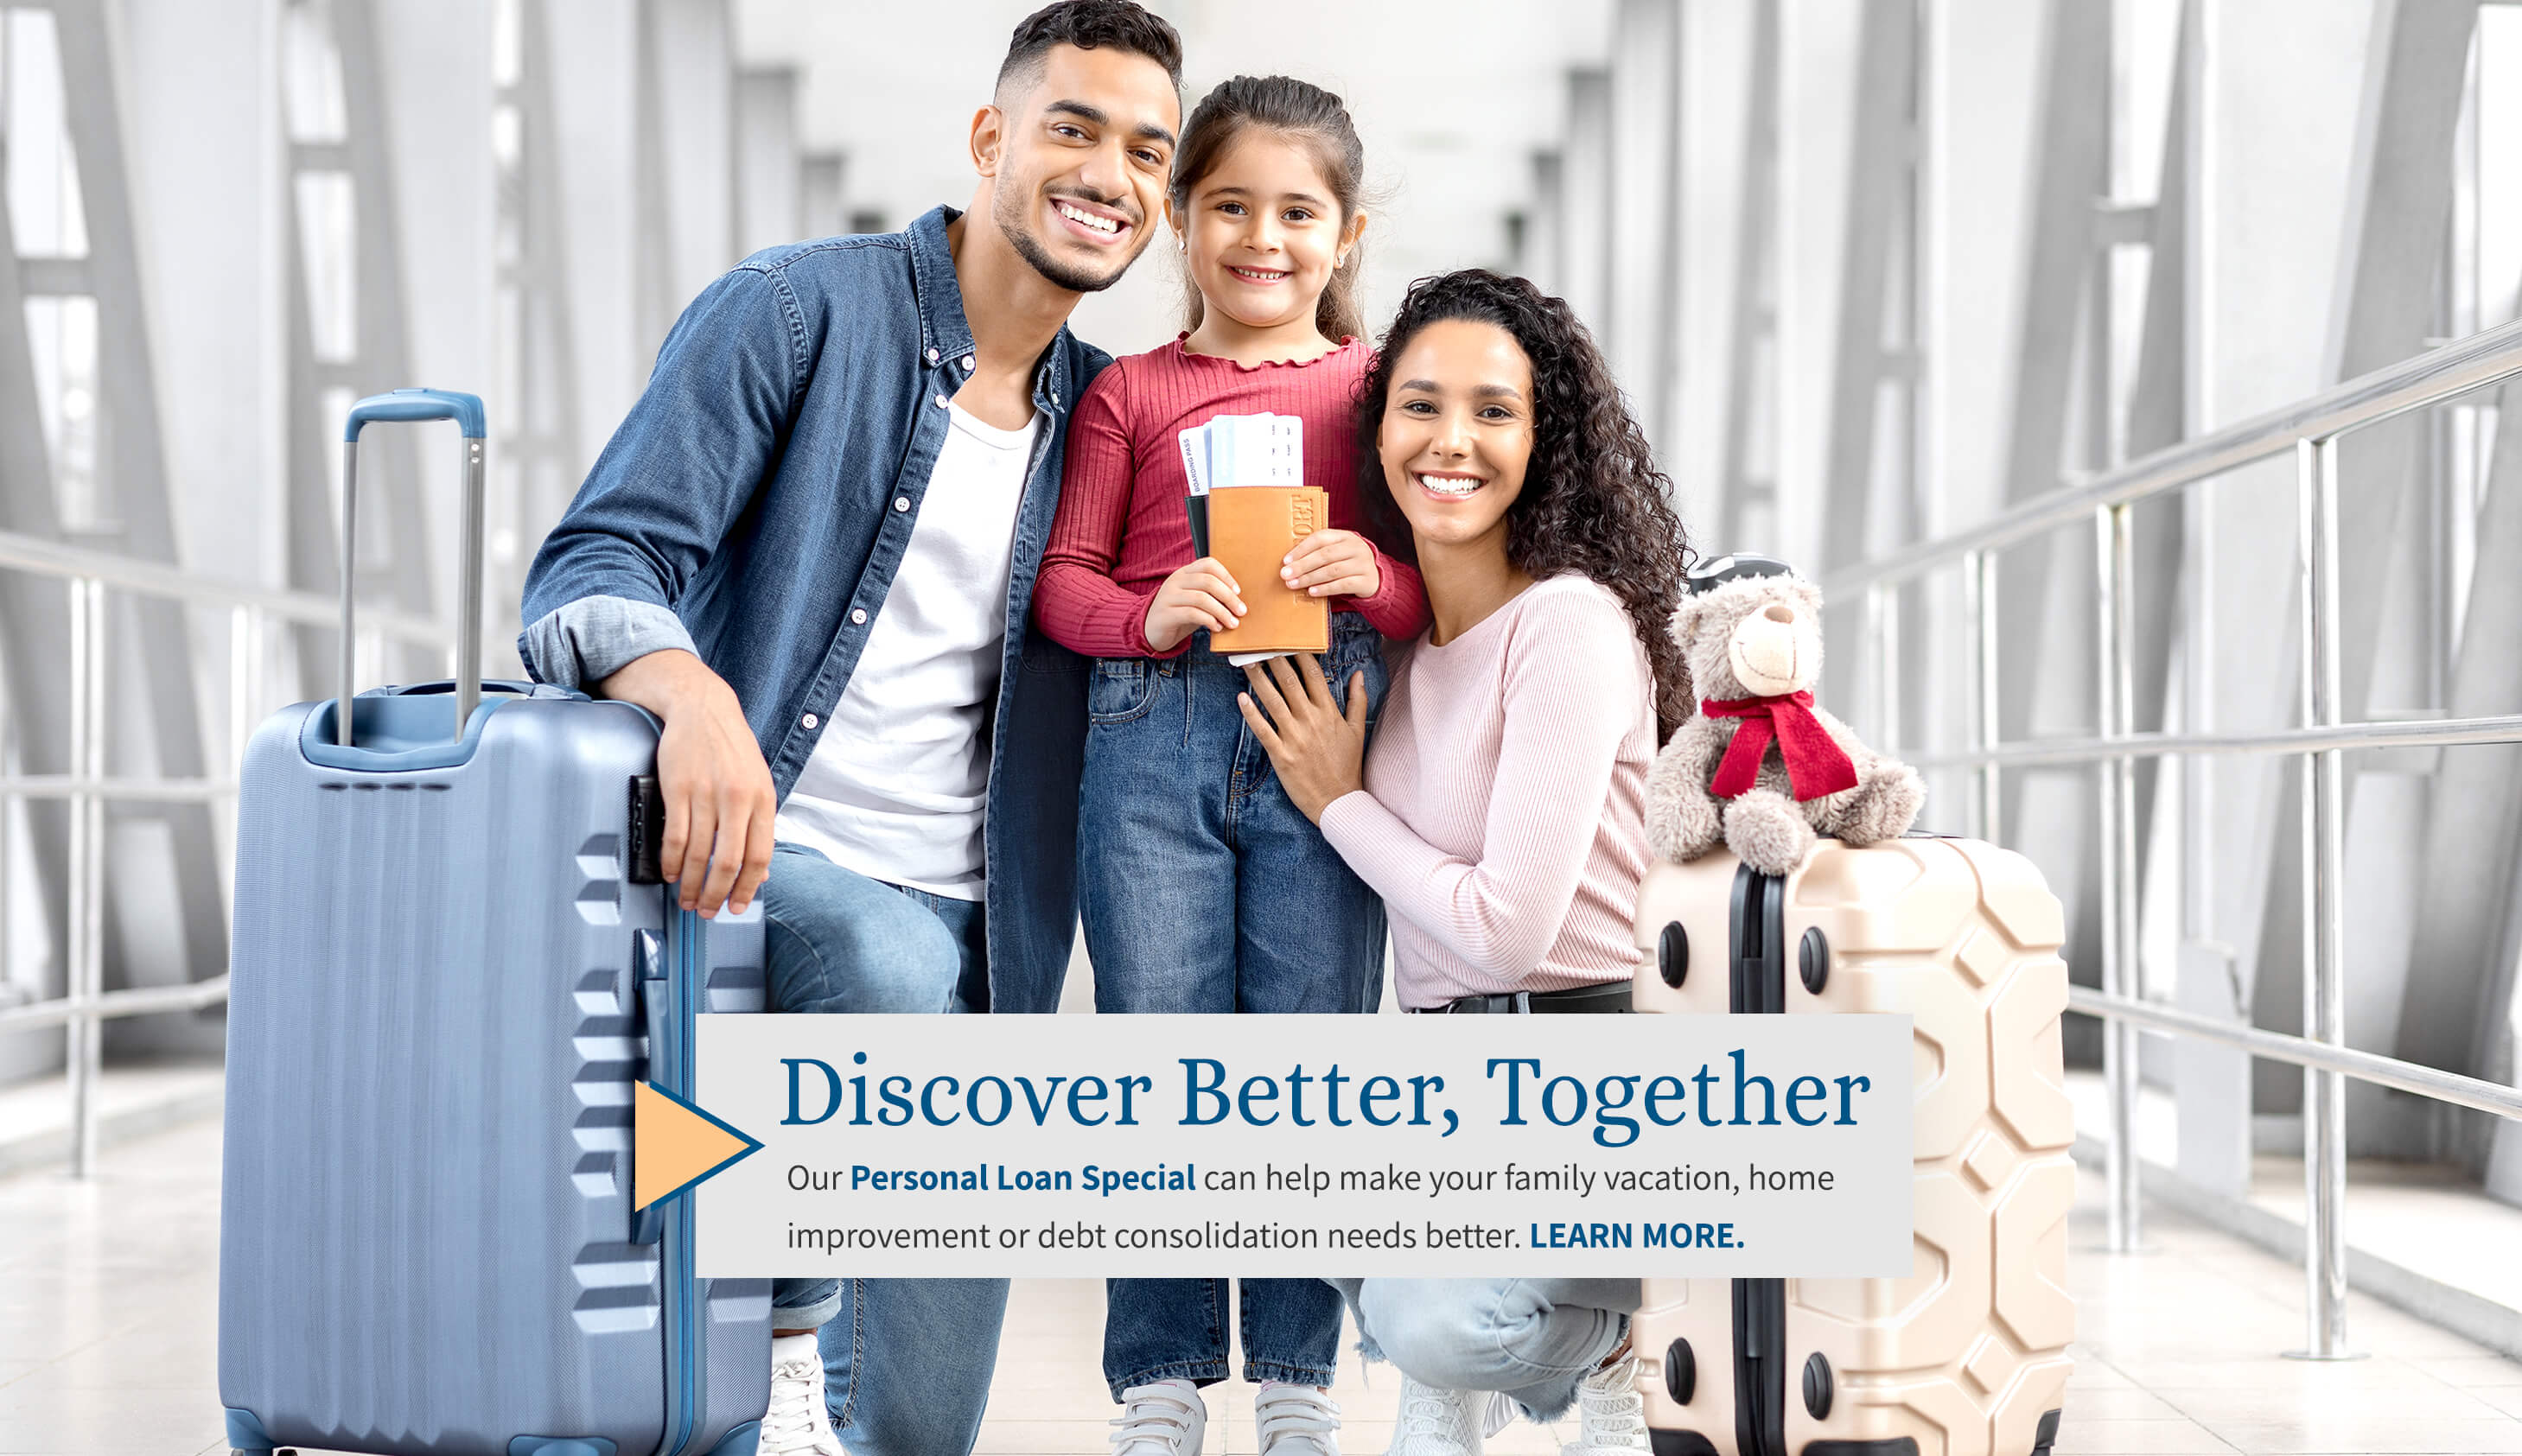 Discover Better, Together. Lending you a helping hand with a Personal Loan Special for all your debt consolidation, home improvement, or other needs. Learn More.